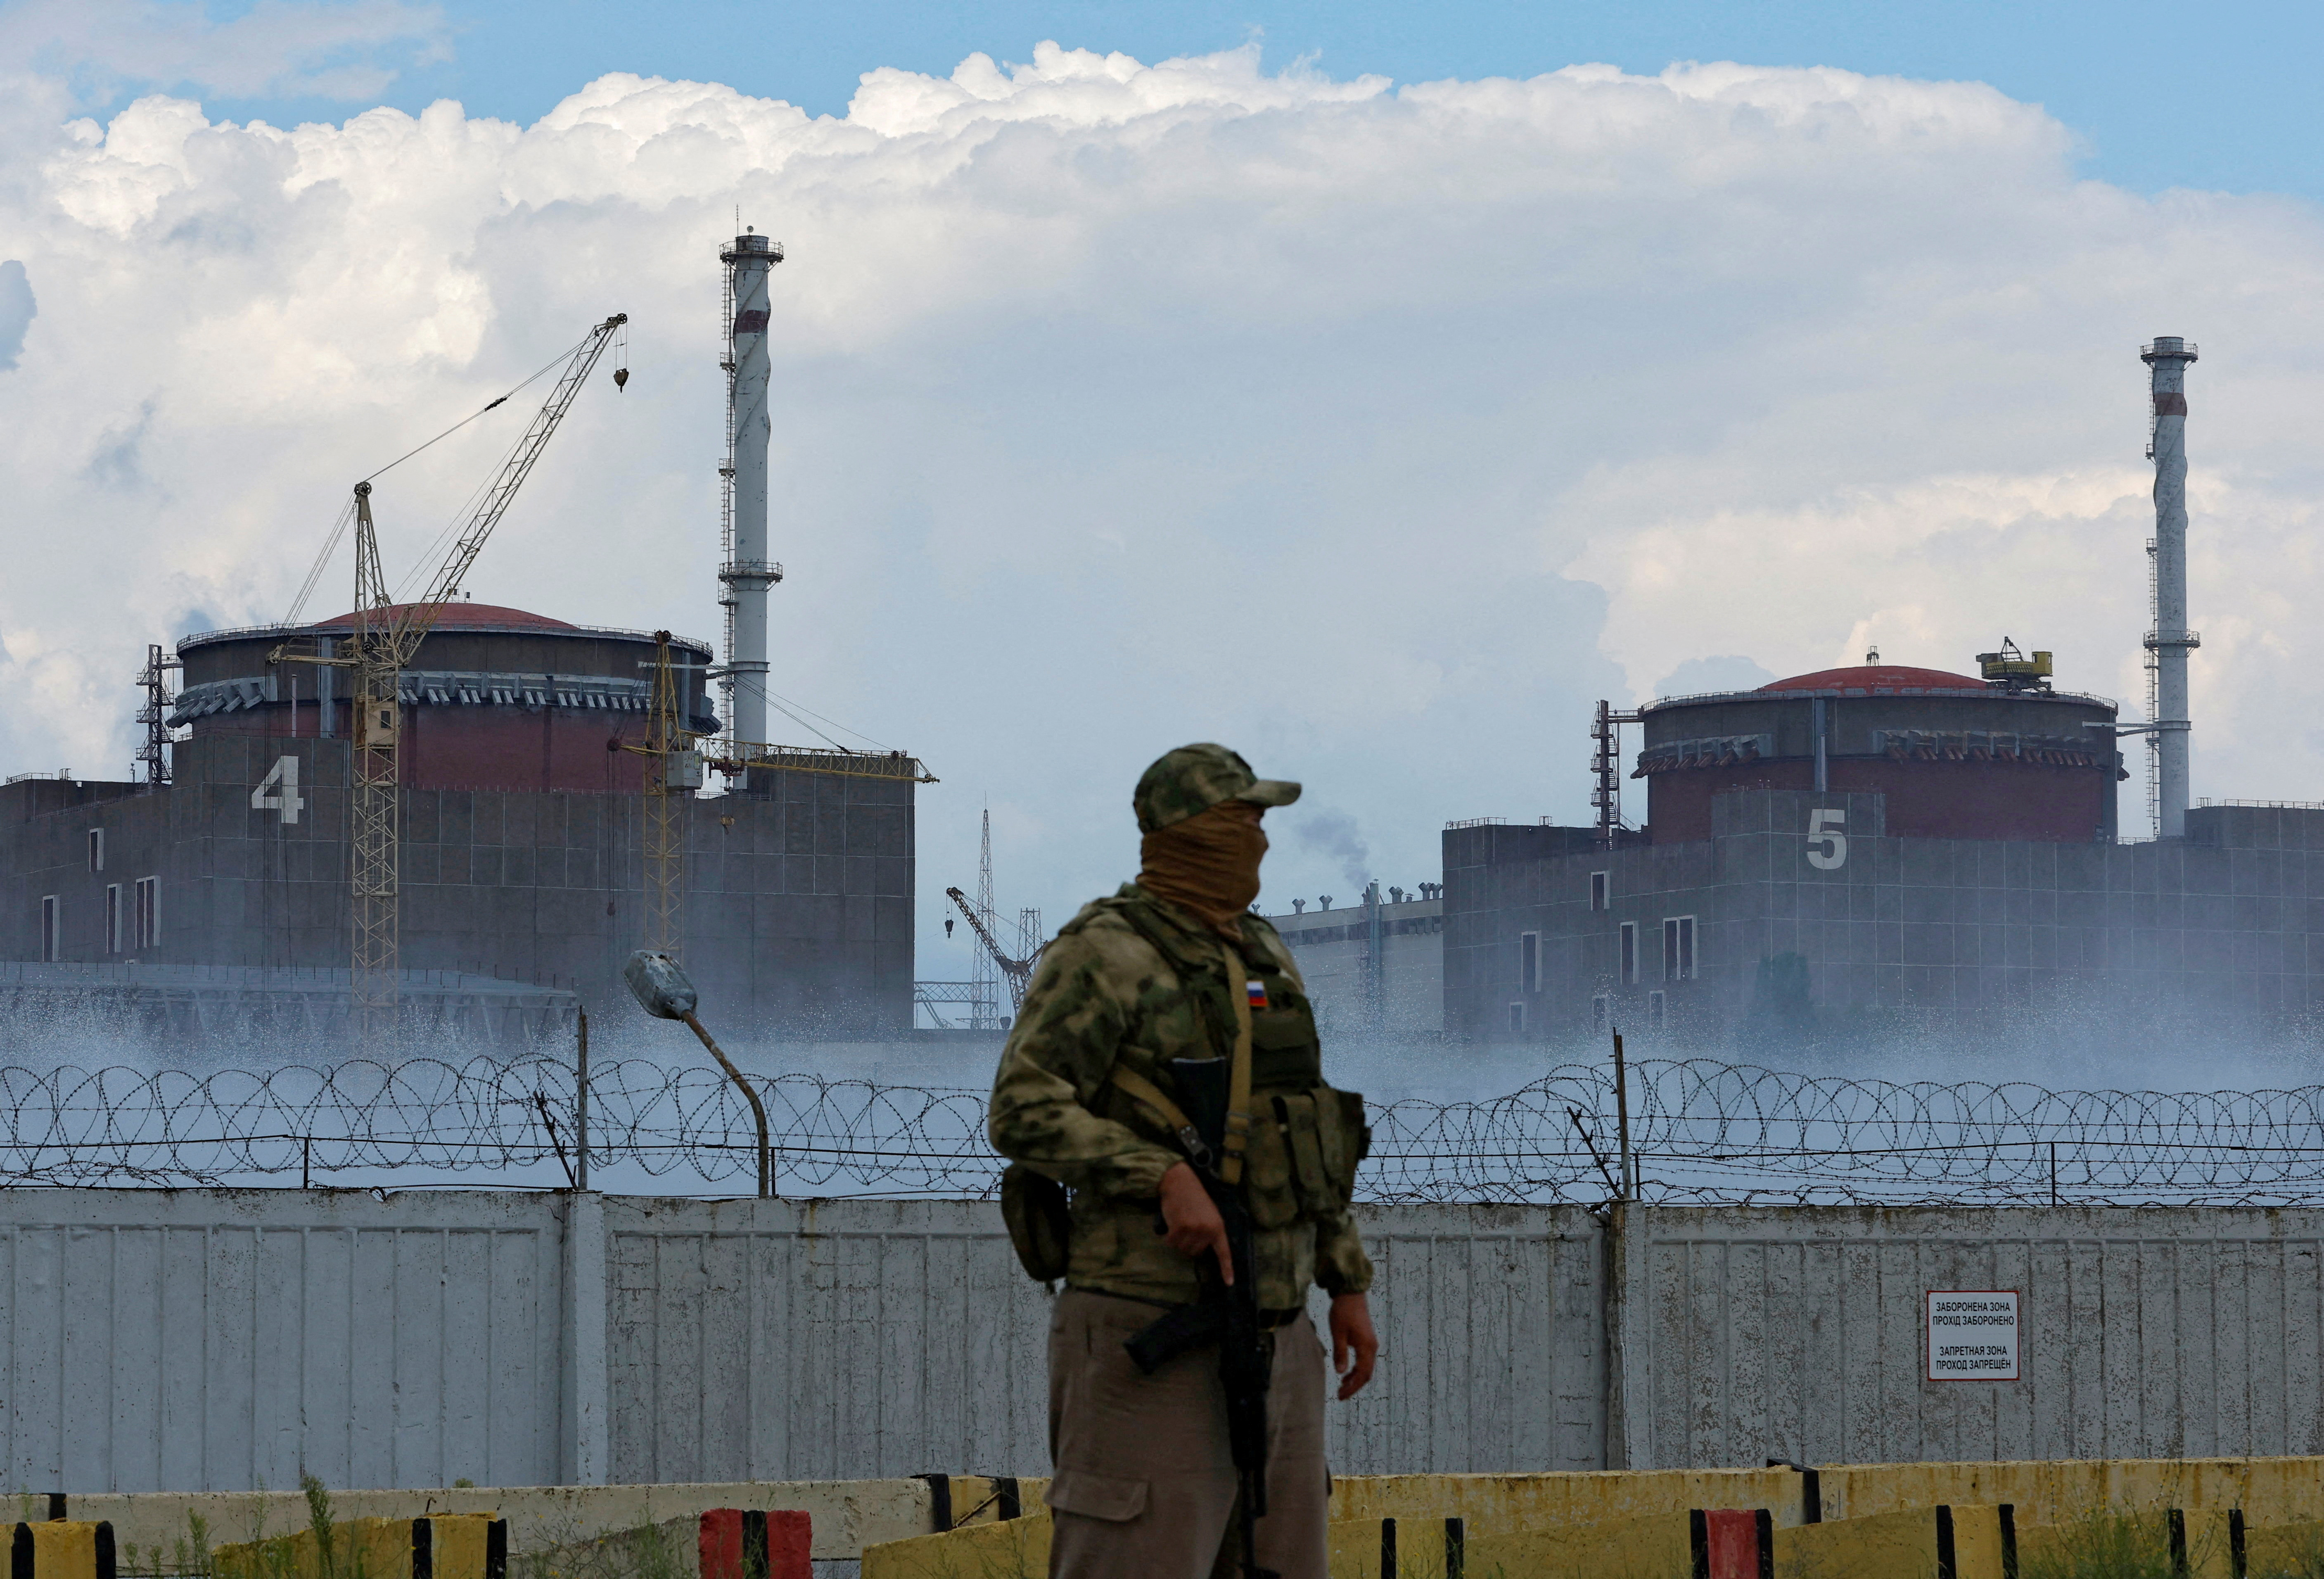 A serviceman with a Russian flag on his uniform stands guard near the Zaporizhzhia nuclear power plant on August 4.